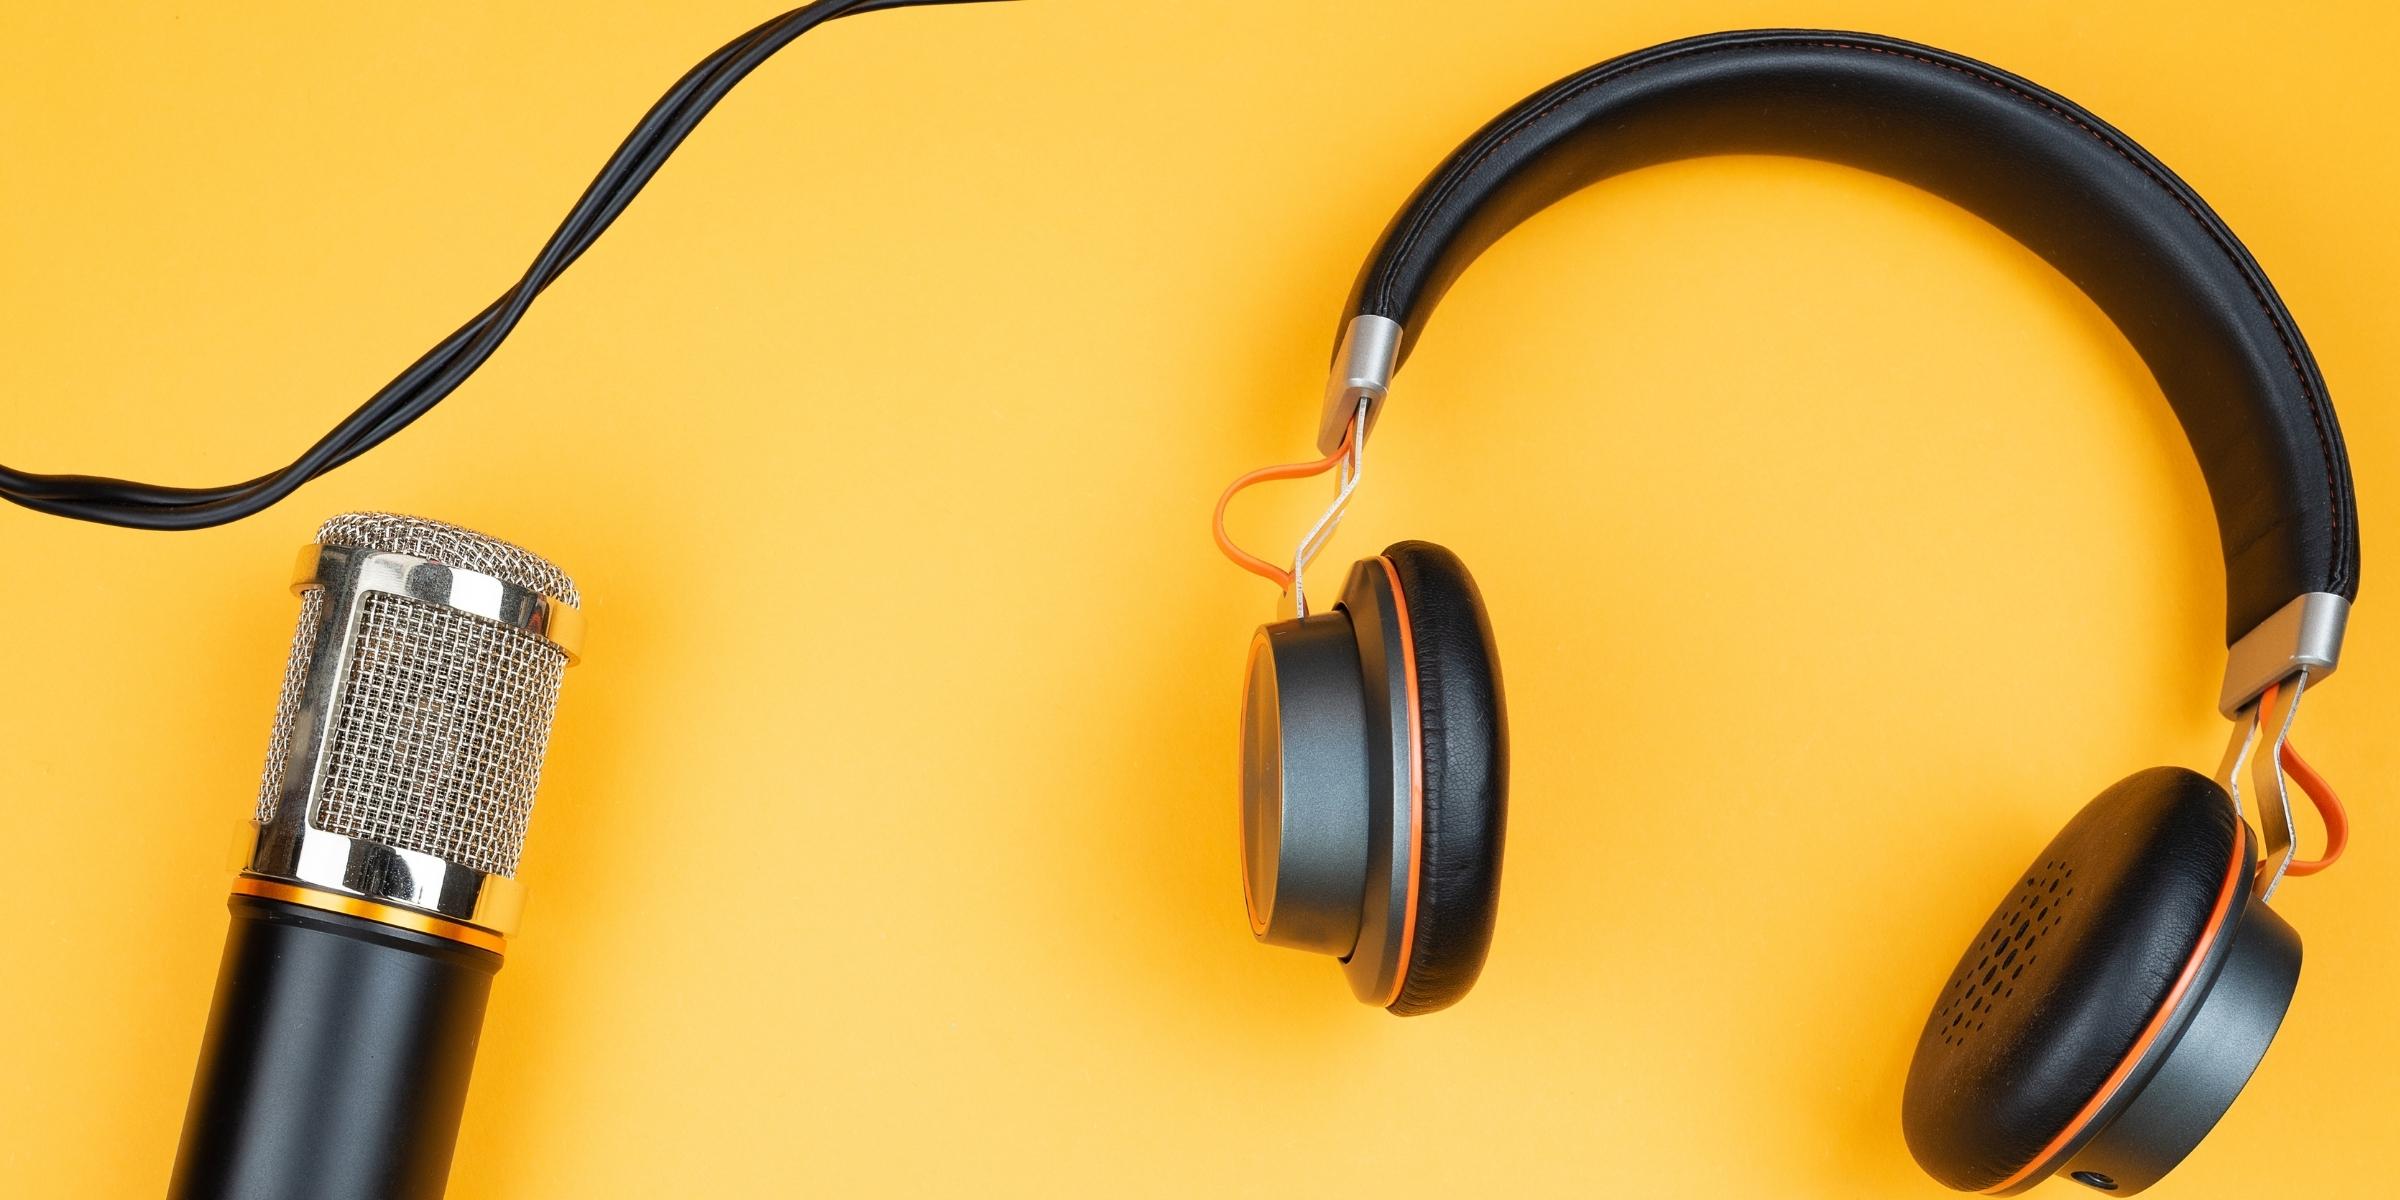 headphones and a microphone against a yellow backdrop